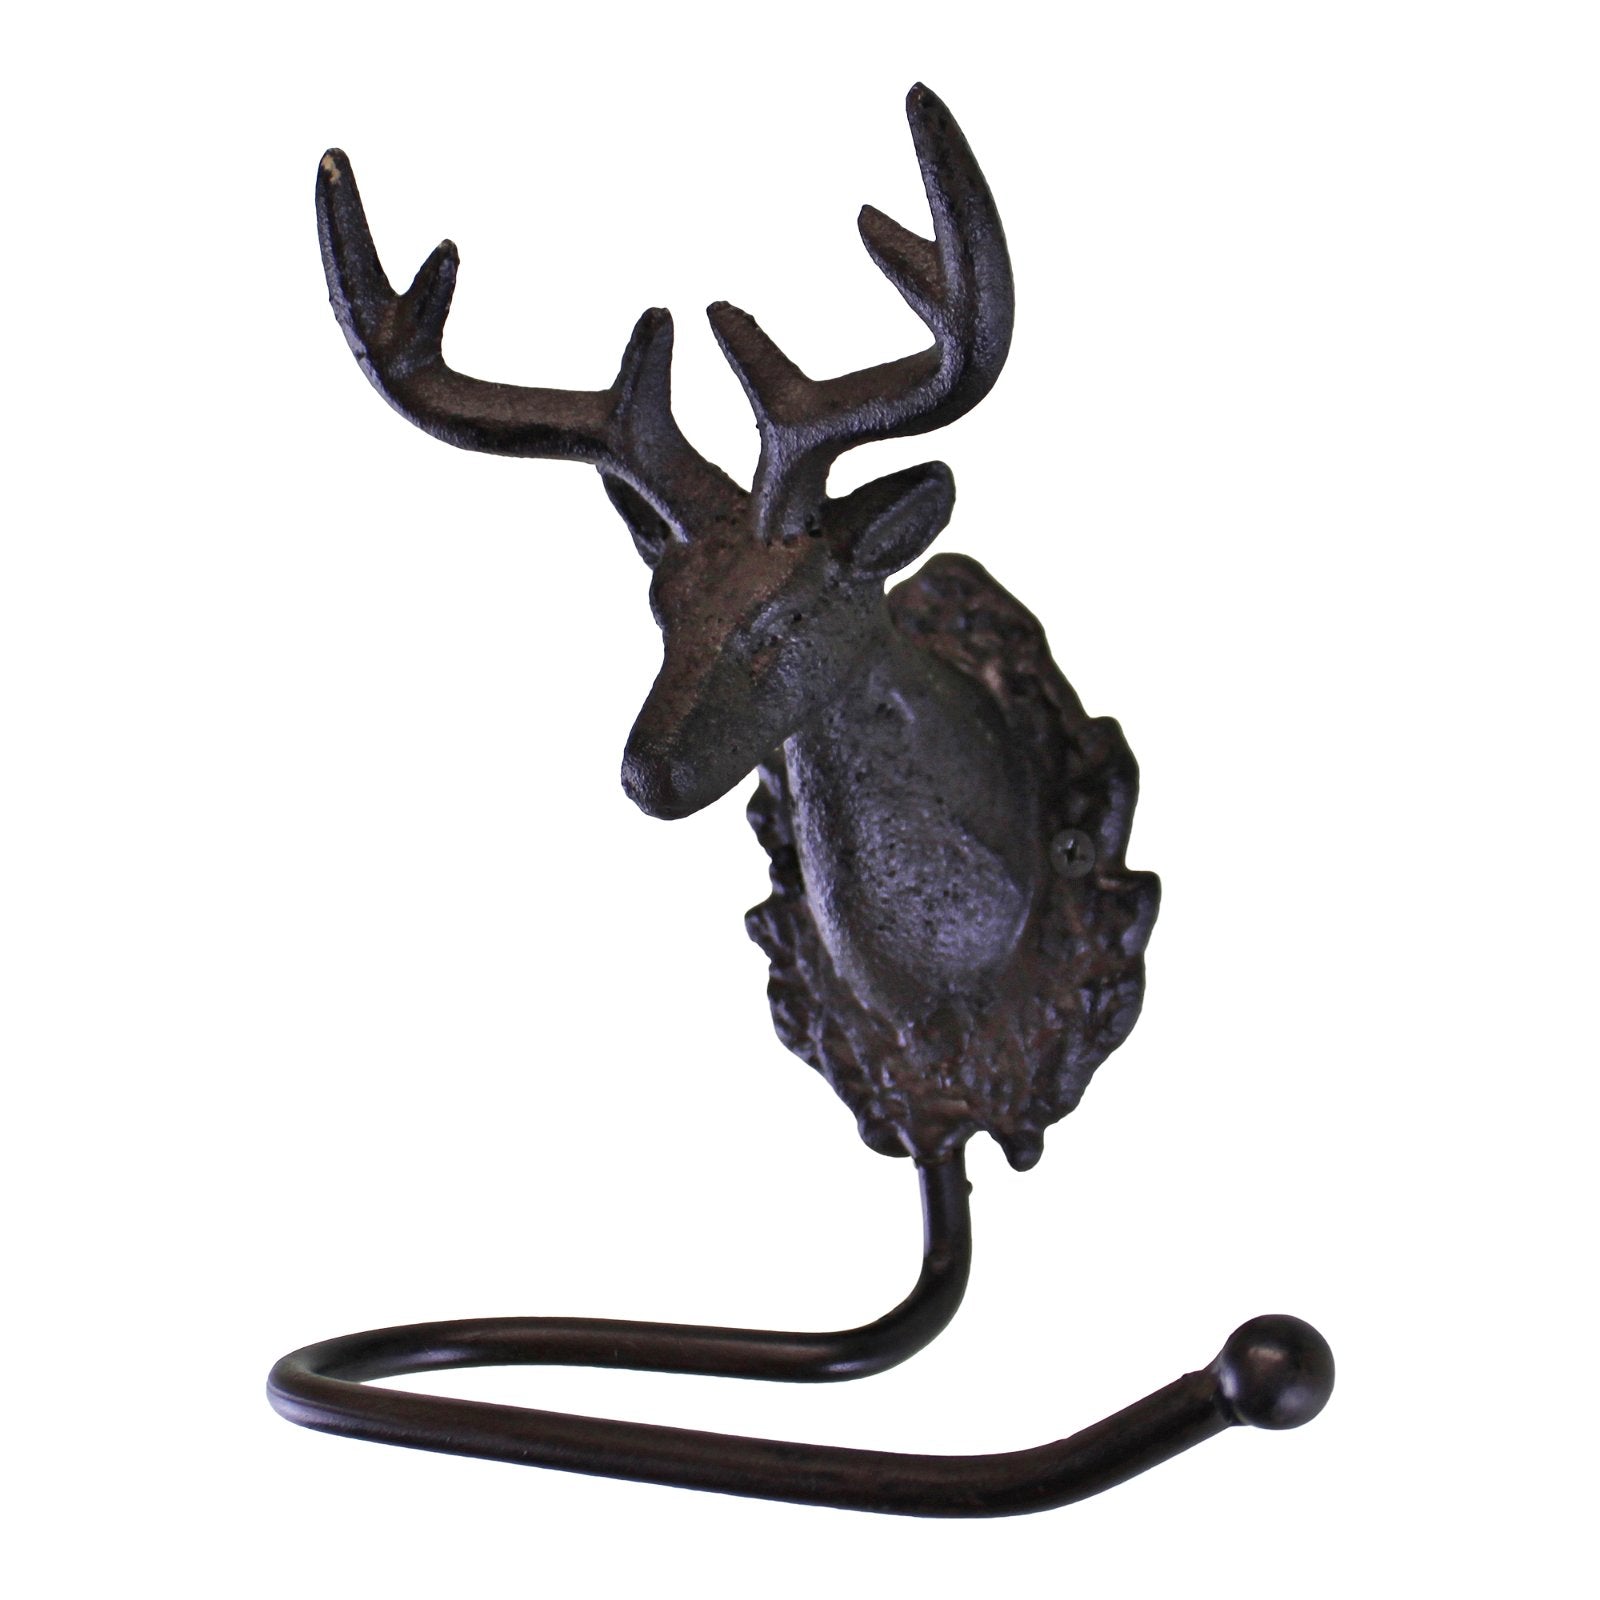 View Cast Iron Rustic Toilet Roll Holder Stag Head Design information